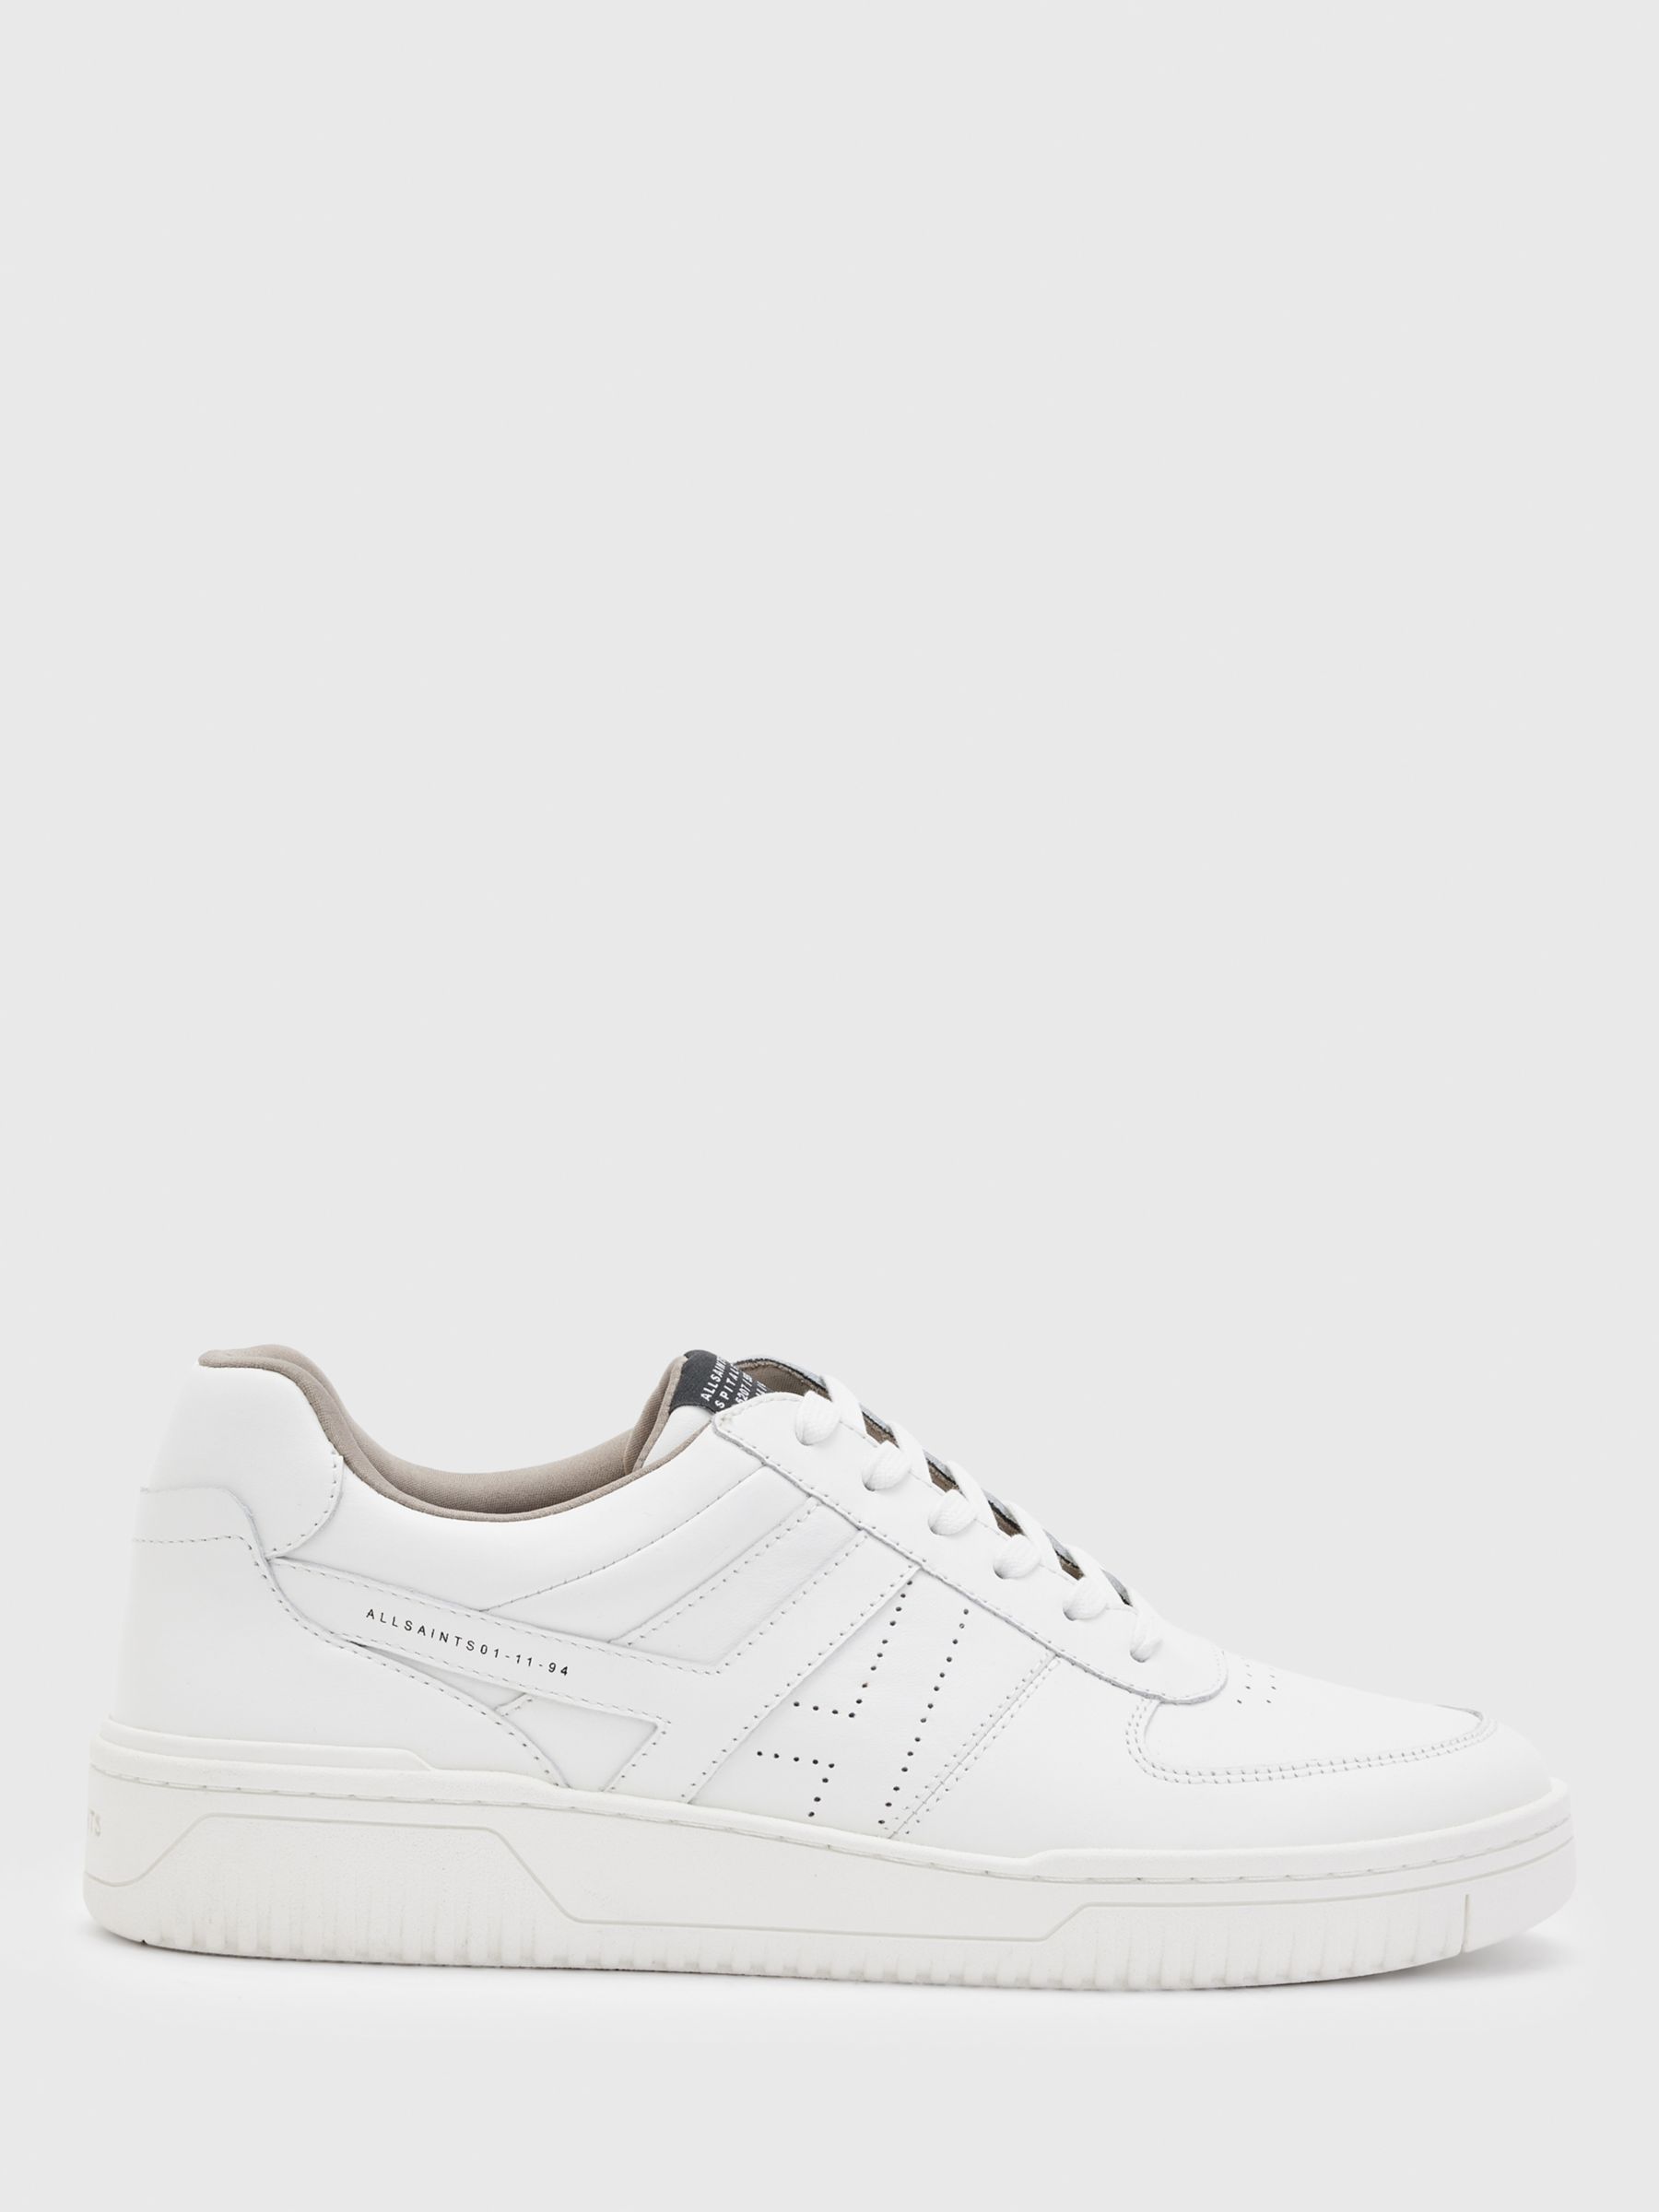 AllSaints Vix Low Top Leather Trainers, White at John Lewis & Partners